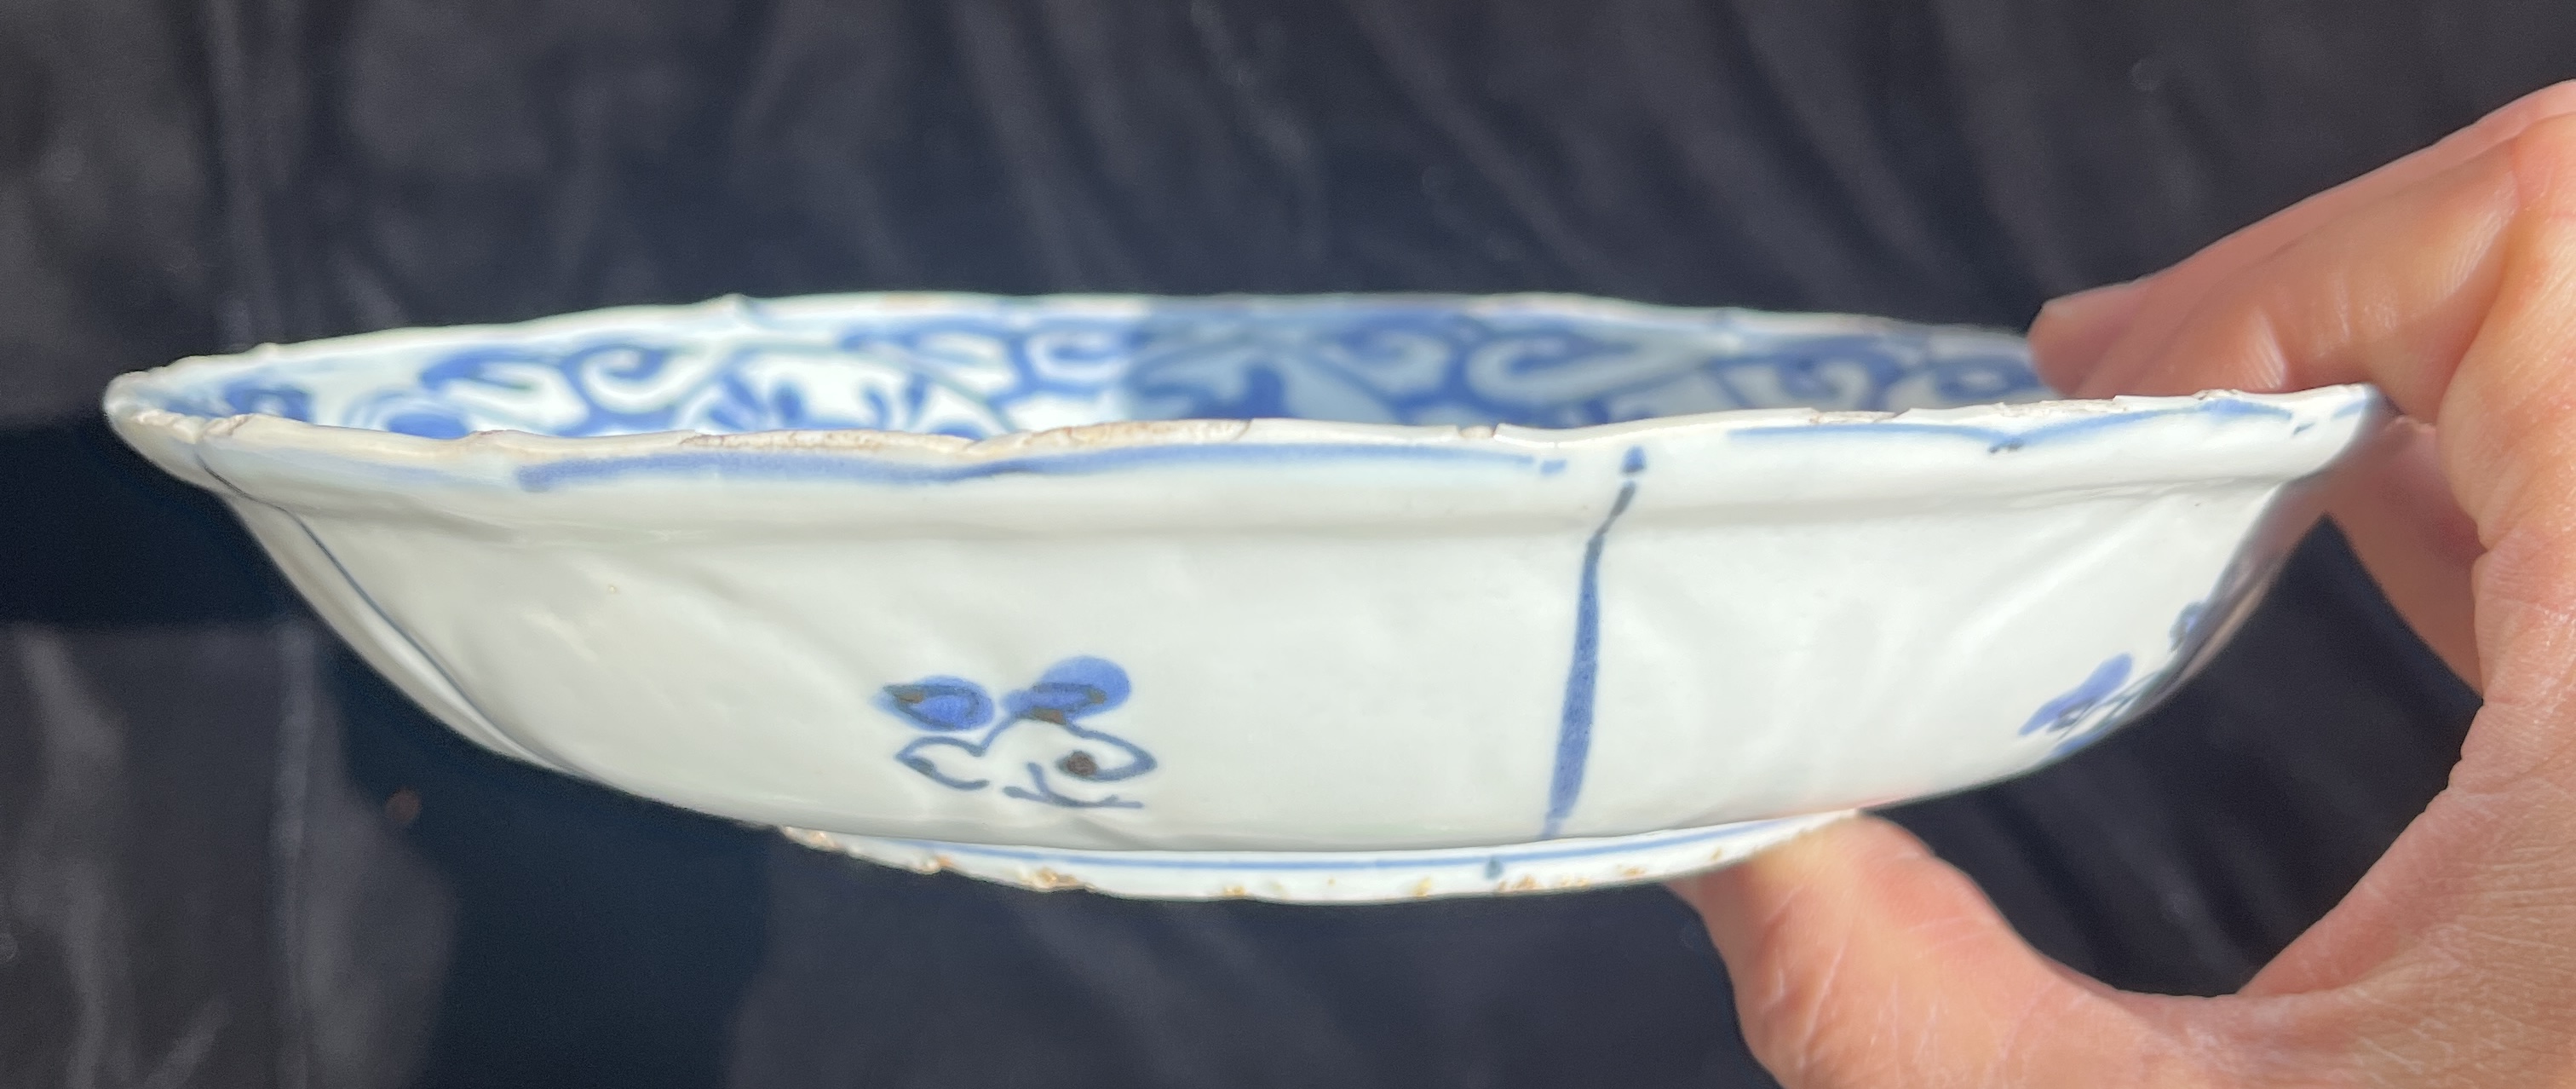 A CHINESE BLUE AND WHITE ‘KRAAK PORSELEIN’ SAUCER DISH, MING DYNASTY, WANLI PERIOD, 1573 – 1619 - Image 8 of 11